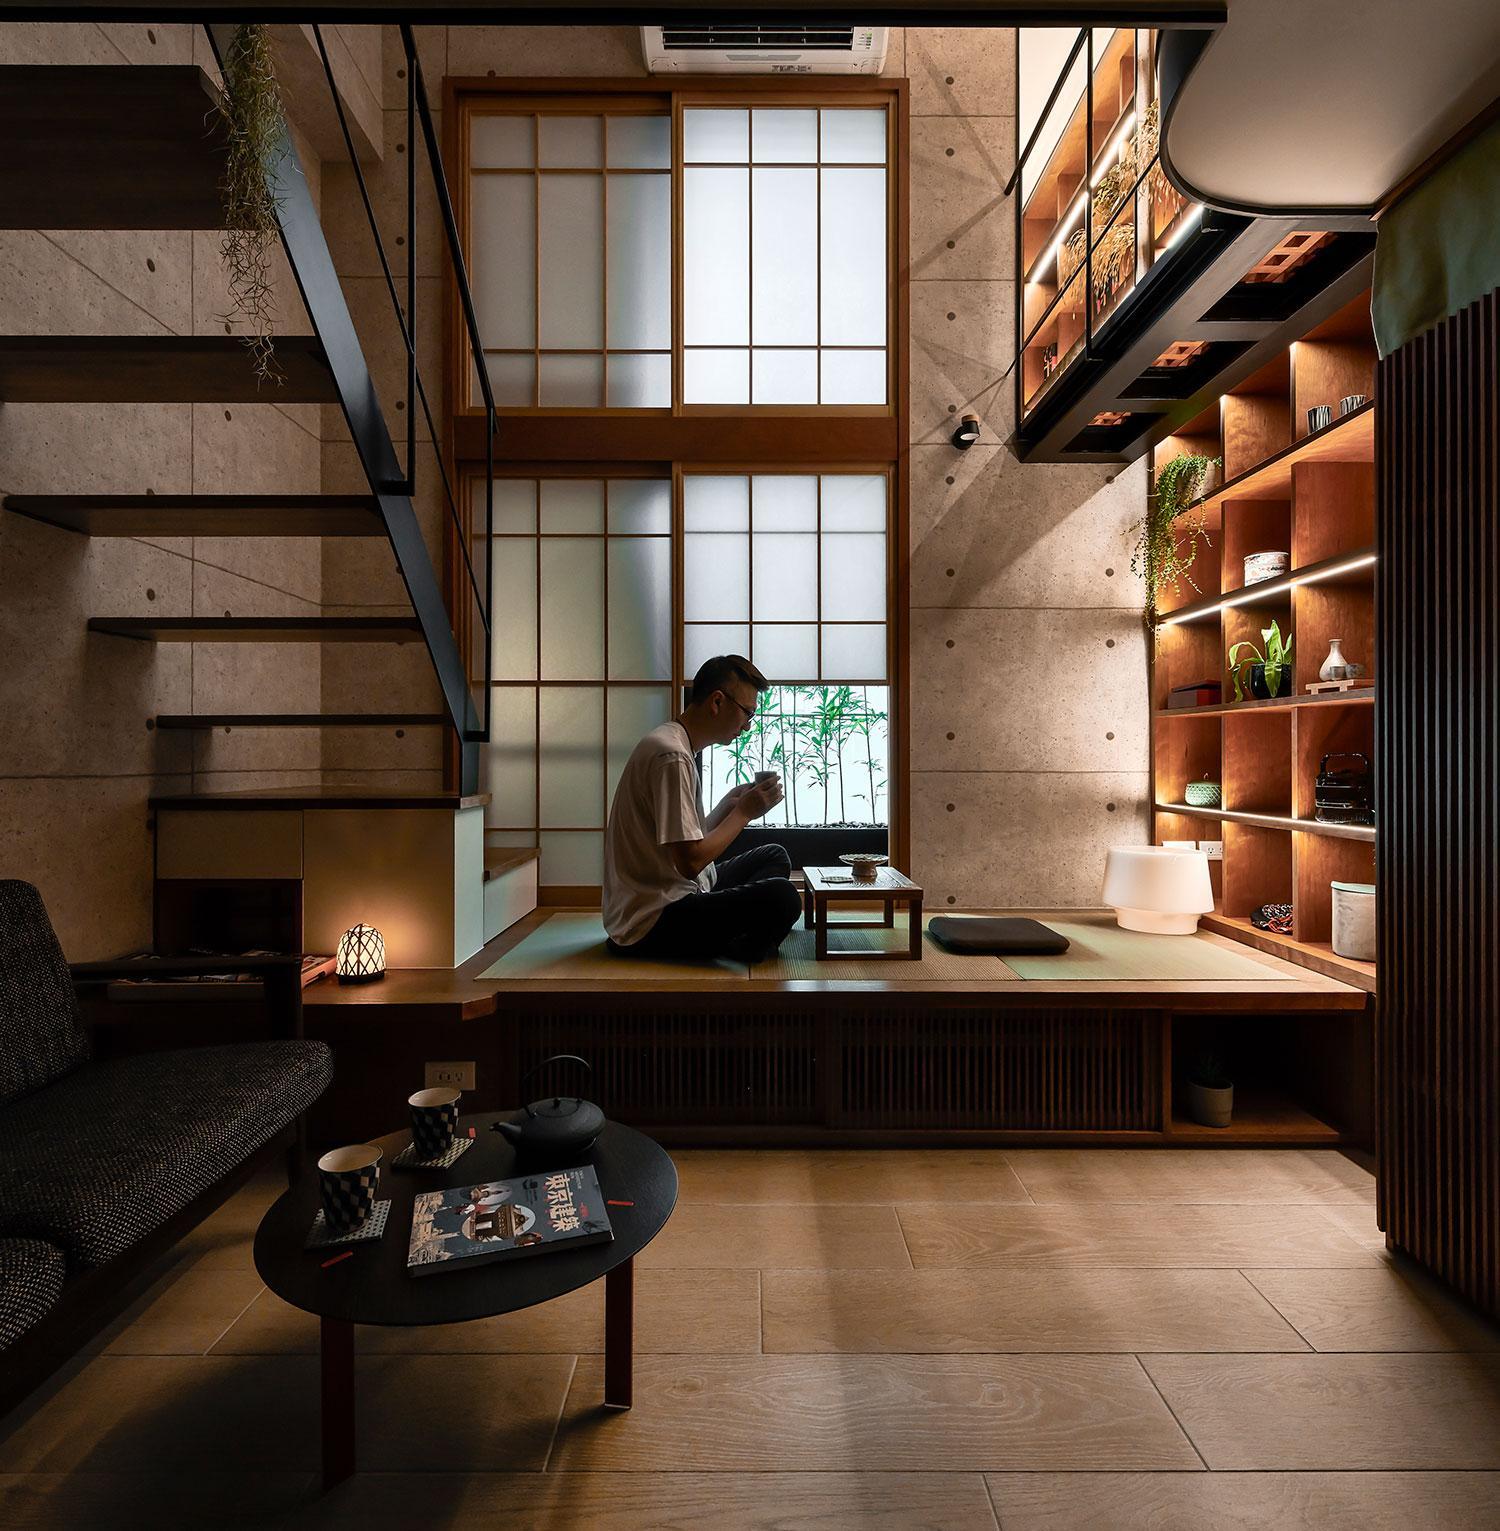 Relive the Wonderful Days of Travel in this 356sqft Japanese-style Loft